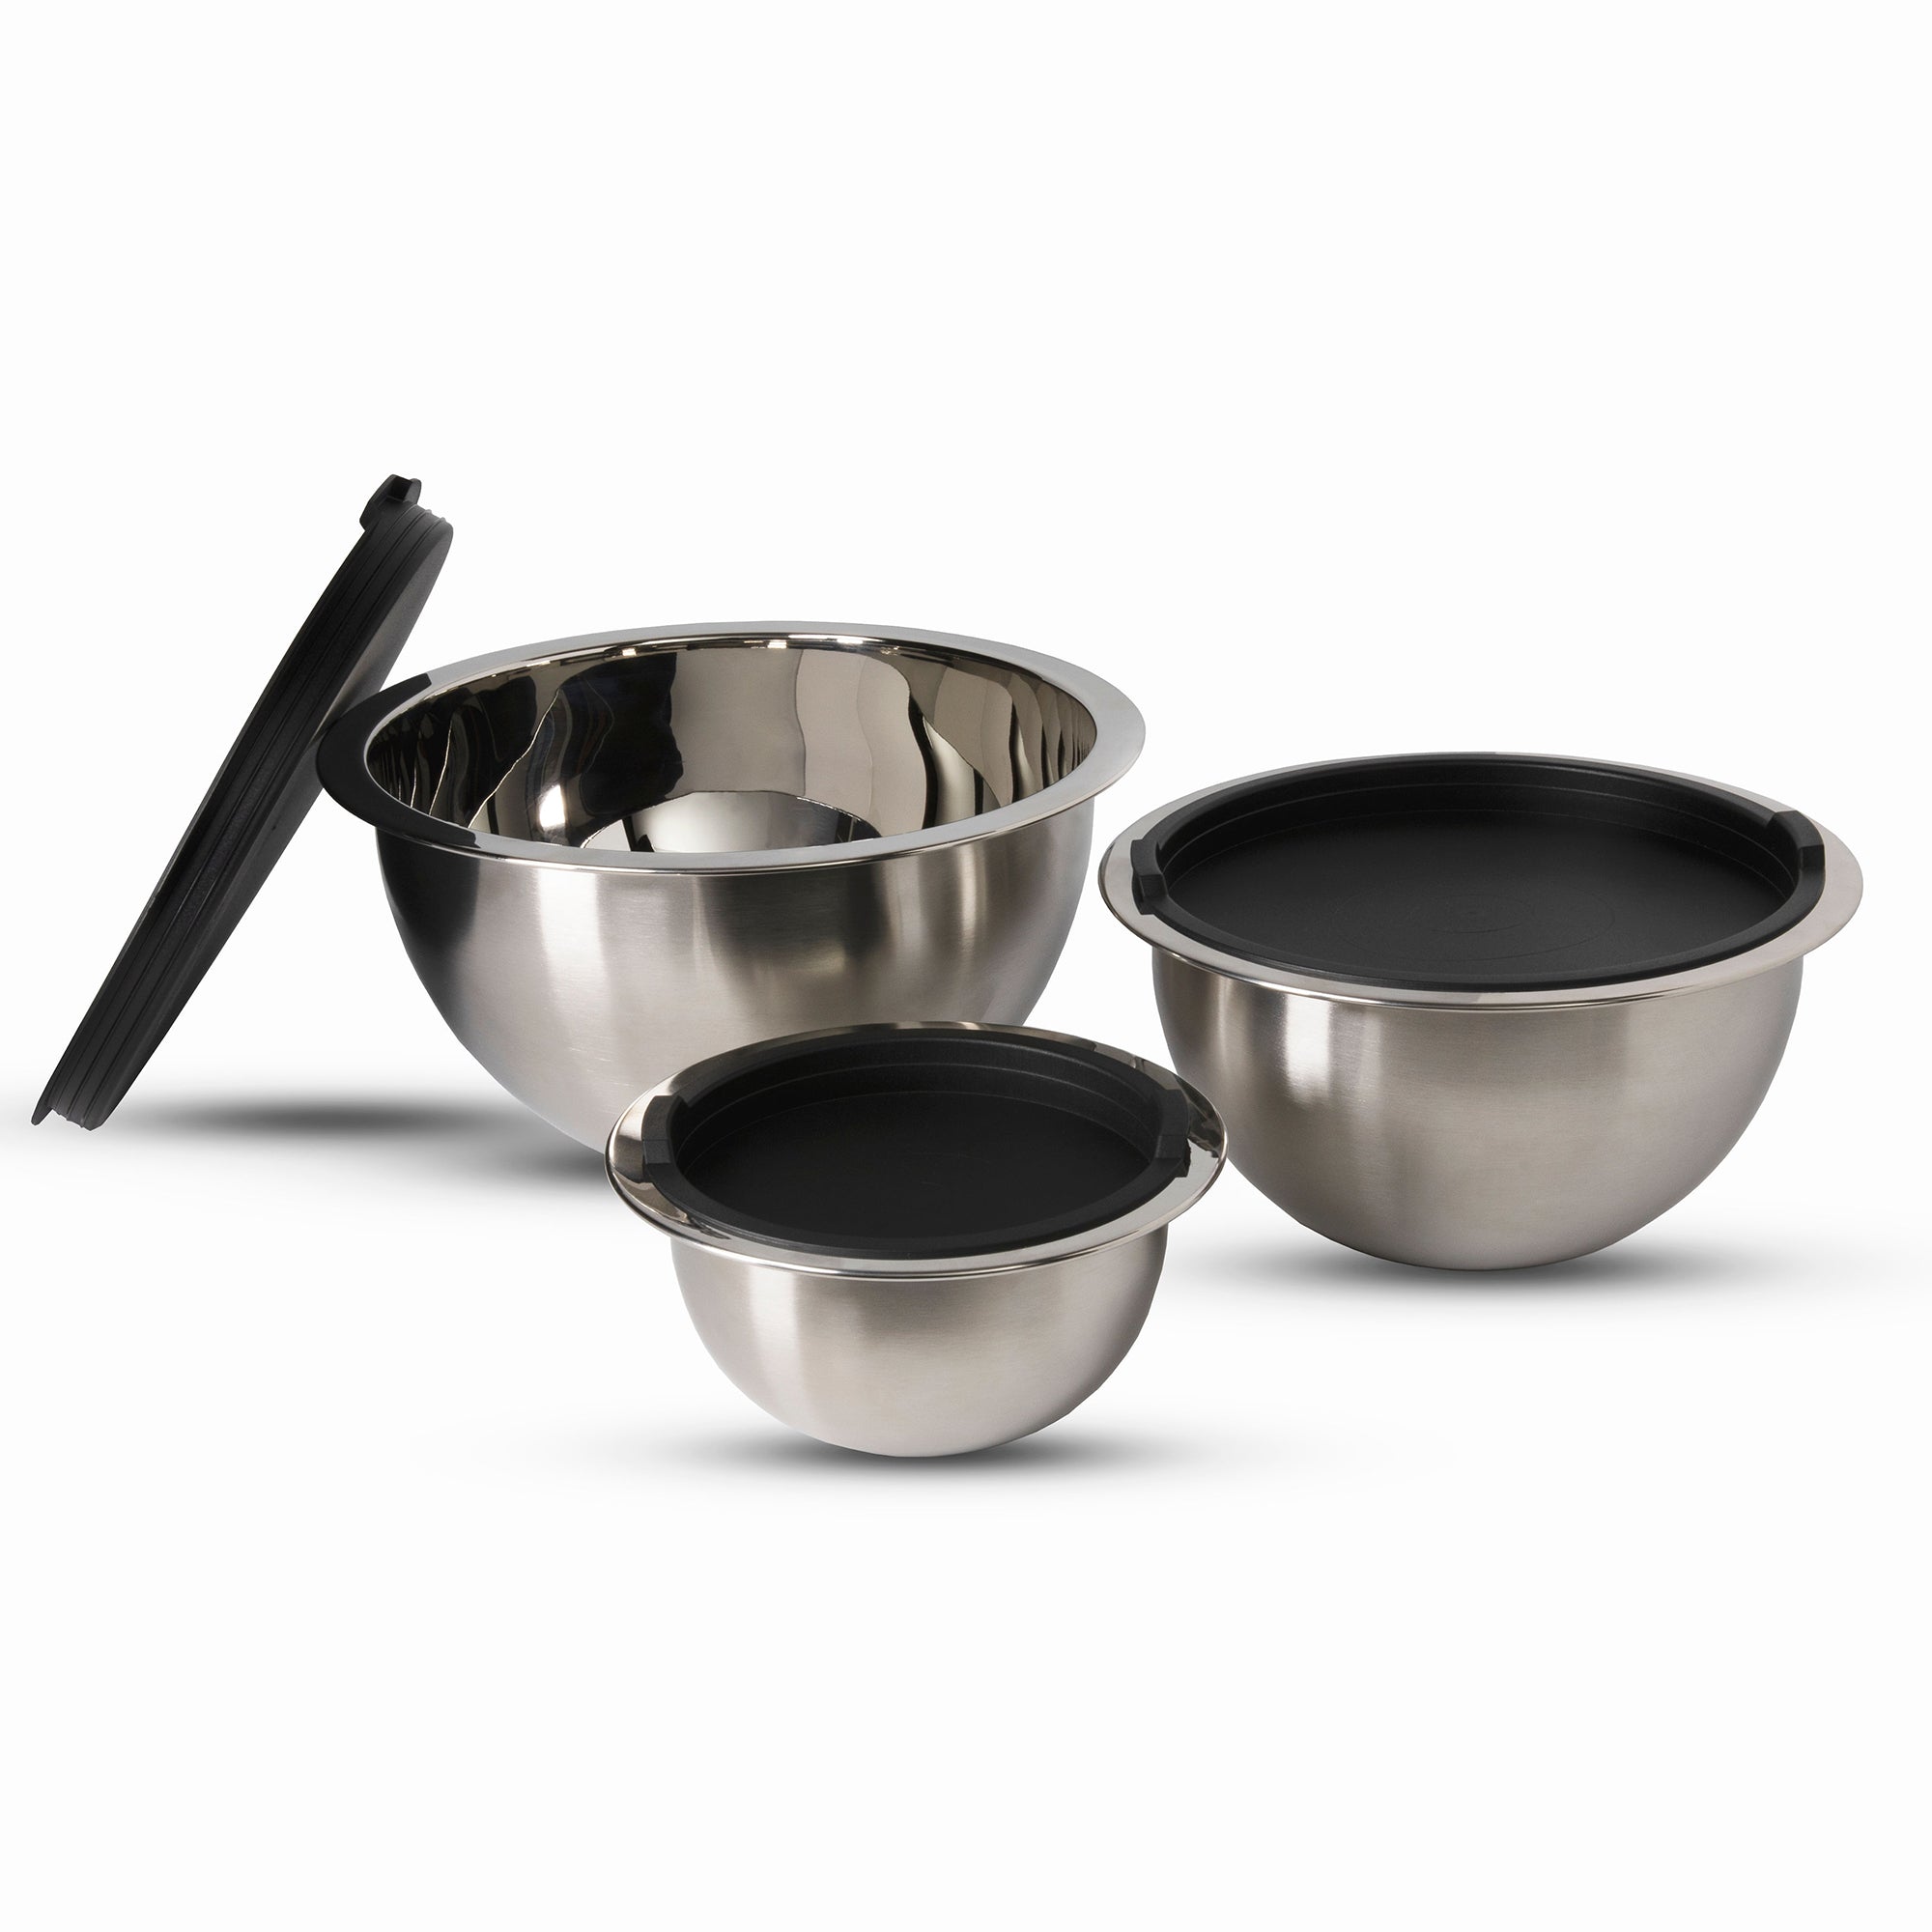 Stainless Steel Mixing Bowls 4-Piece Kitchen Set